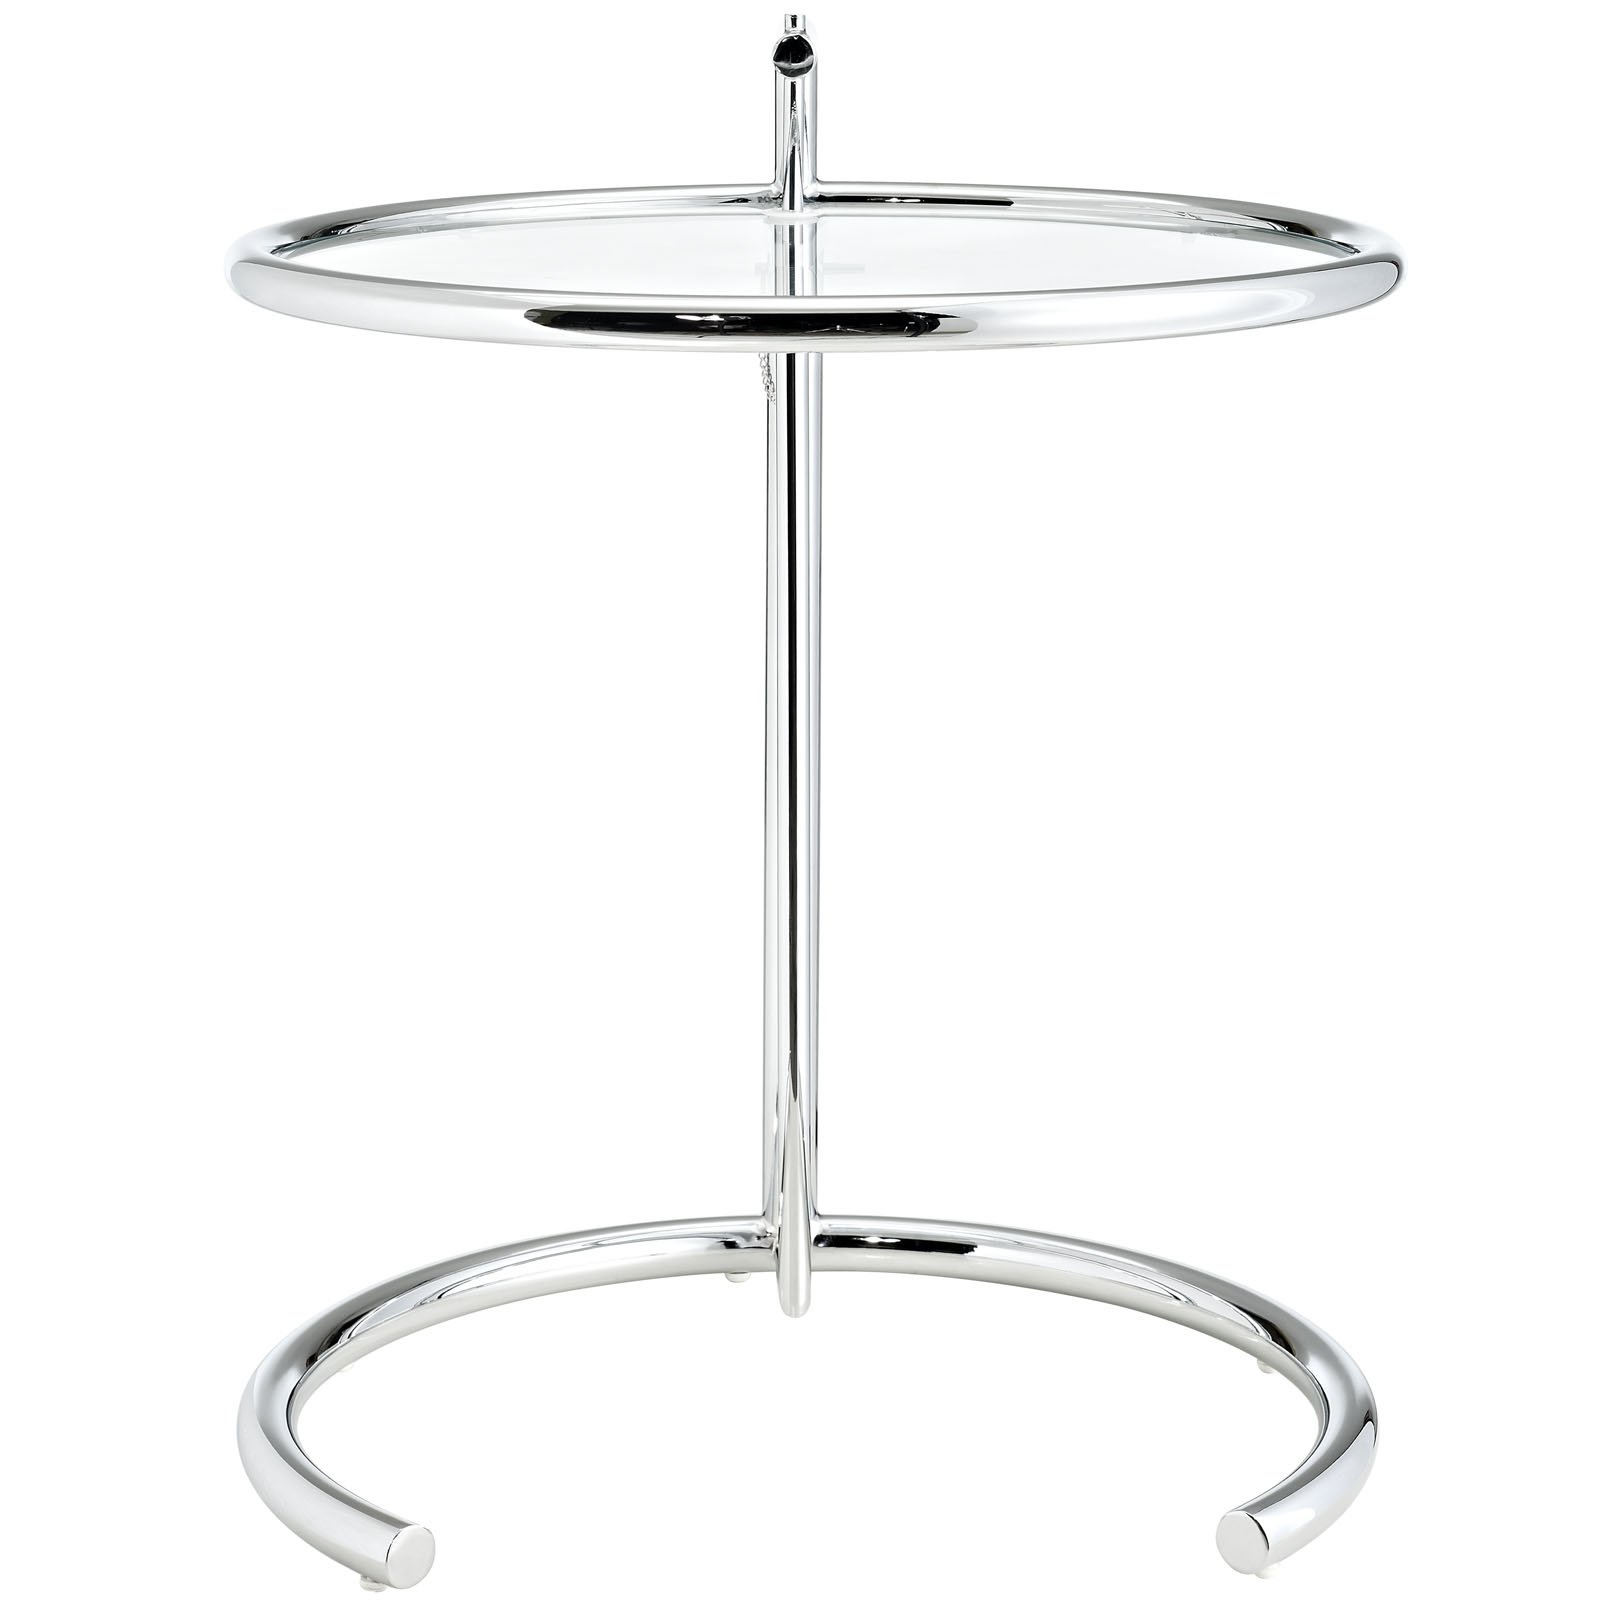 America Luxury - Tables Modern Contemporary Gray Side Table Silver